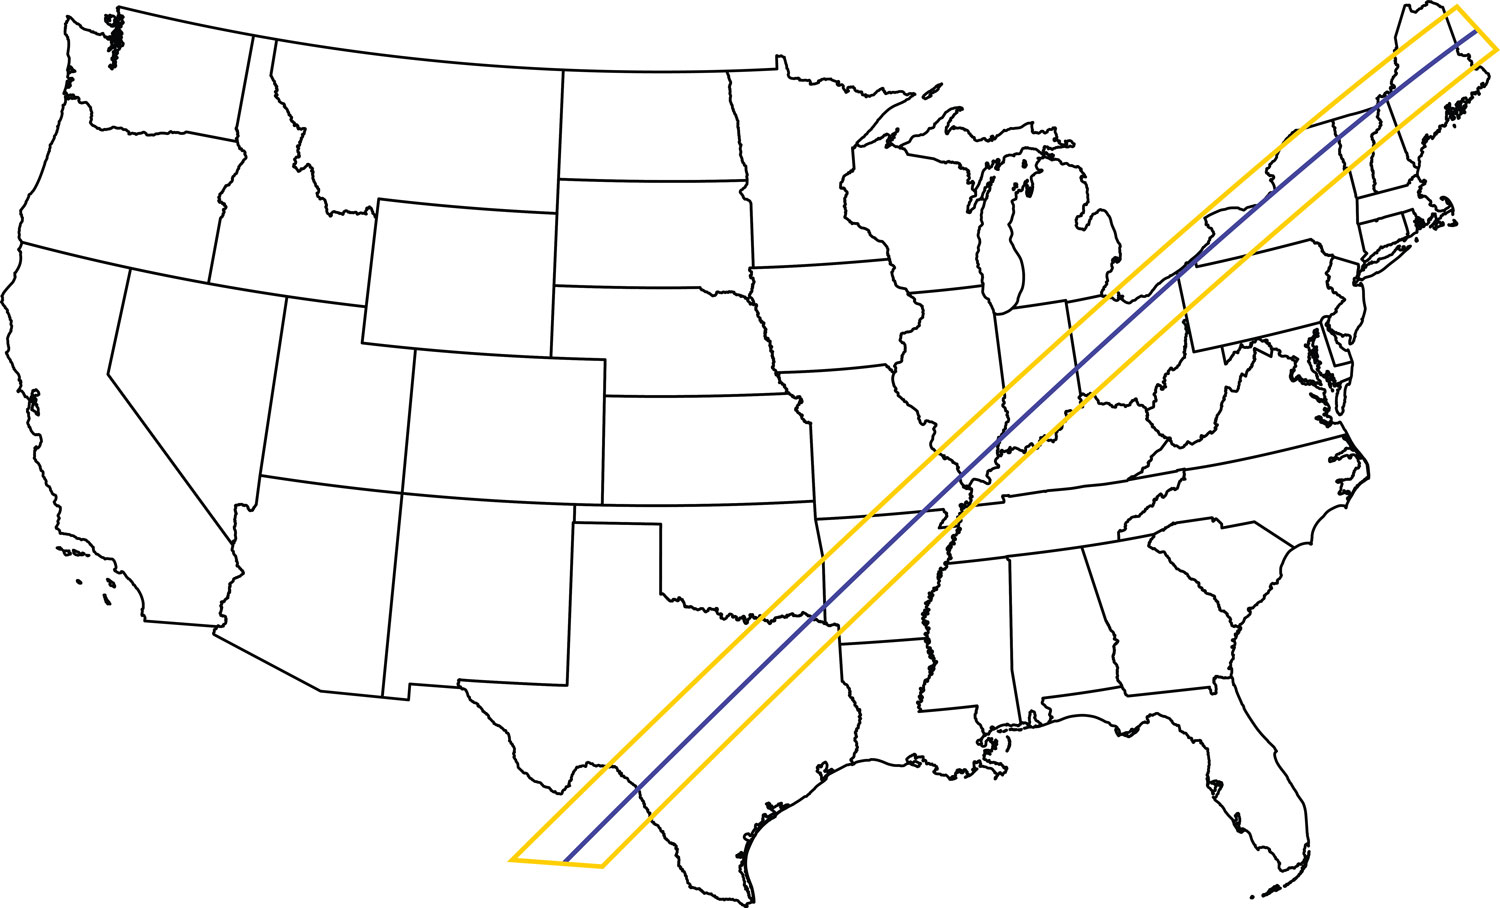 Solar Eclipse 2024 Path Of Totality Illinois cathee analiese